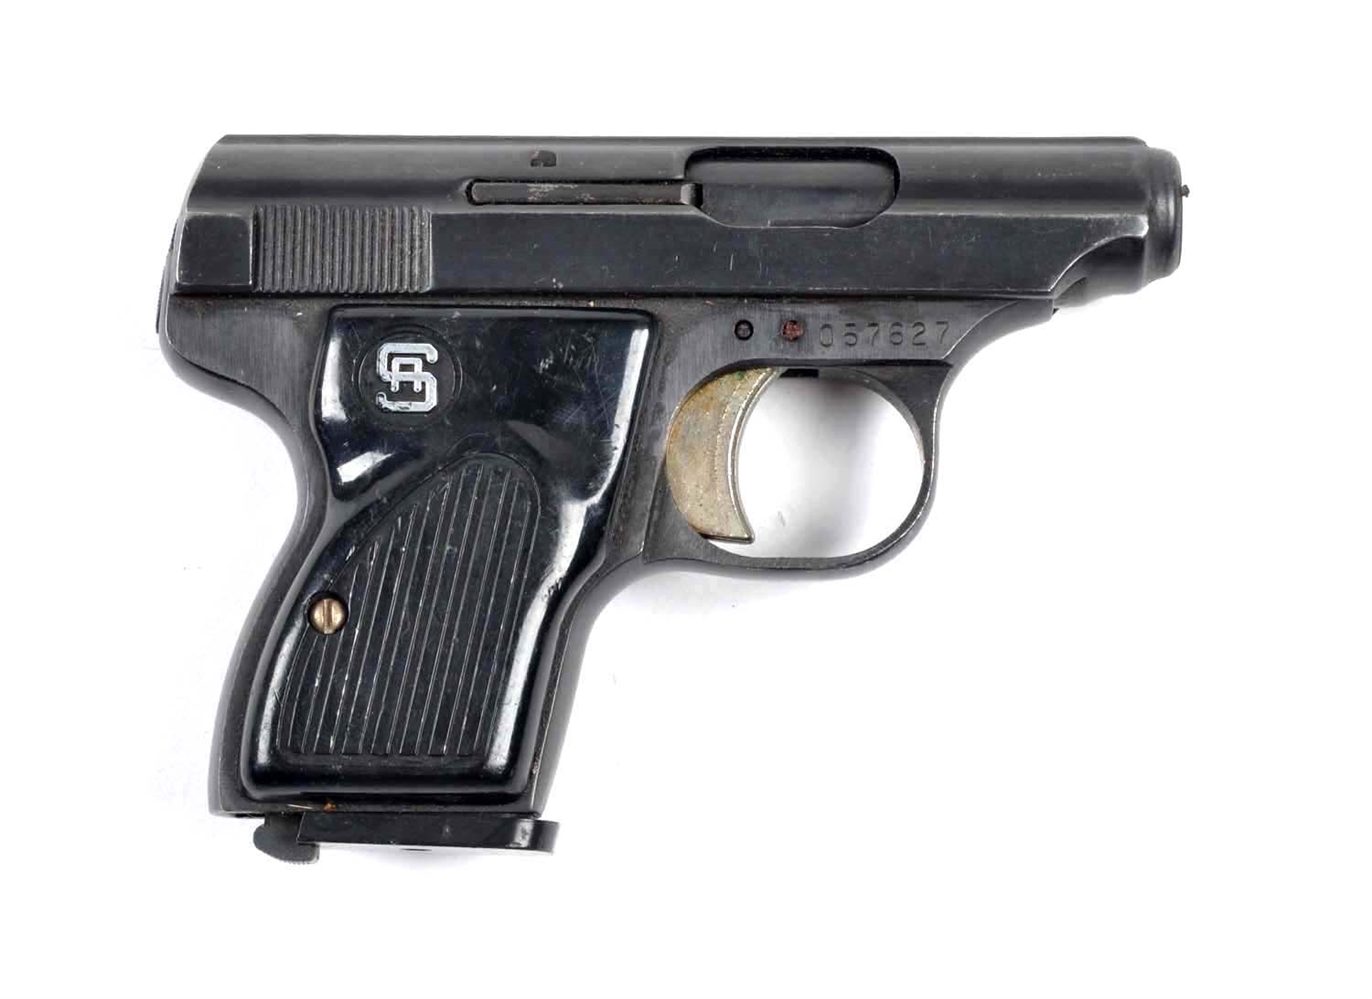 (M) STERLING ARMS SEMI-AUTOMATIC PISTOL.            